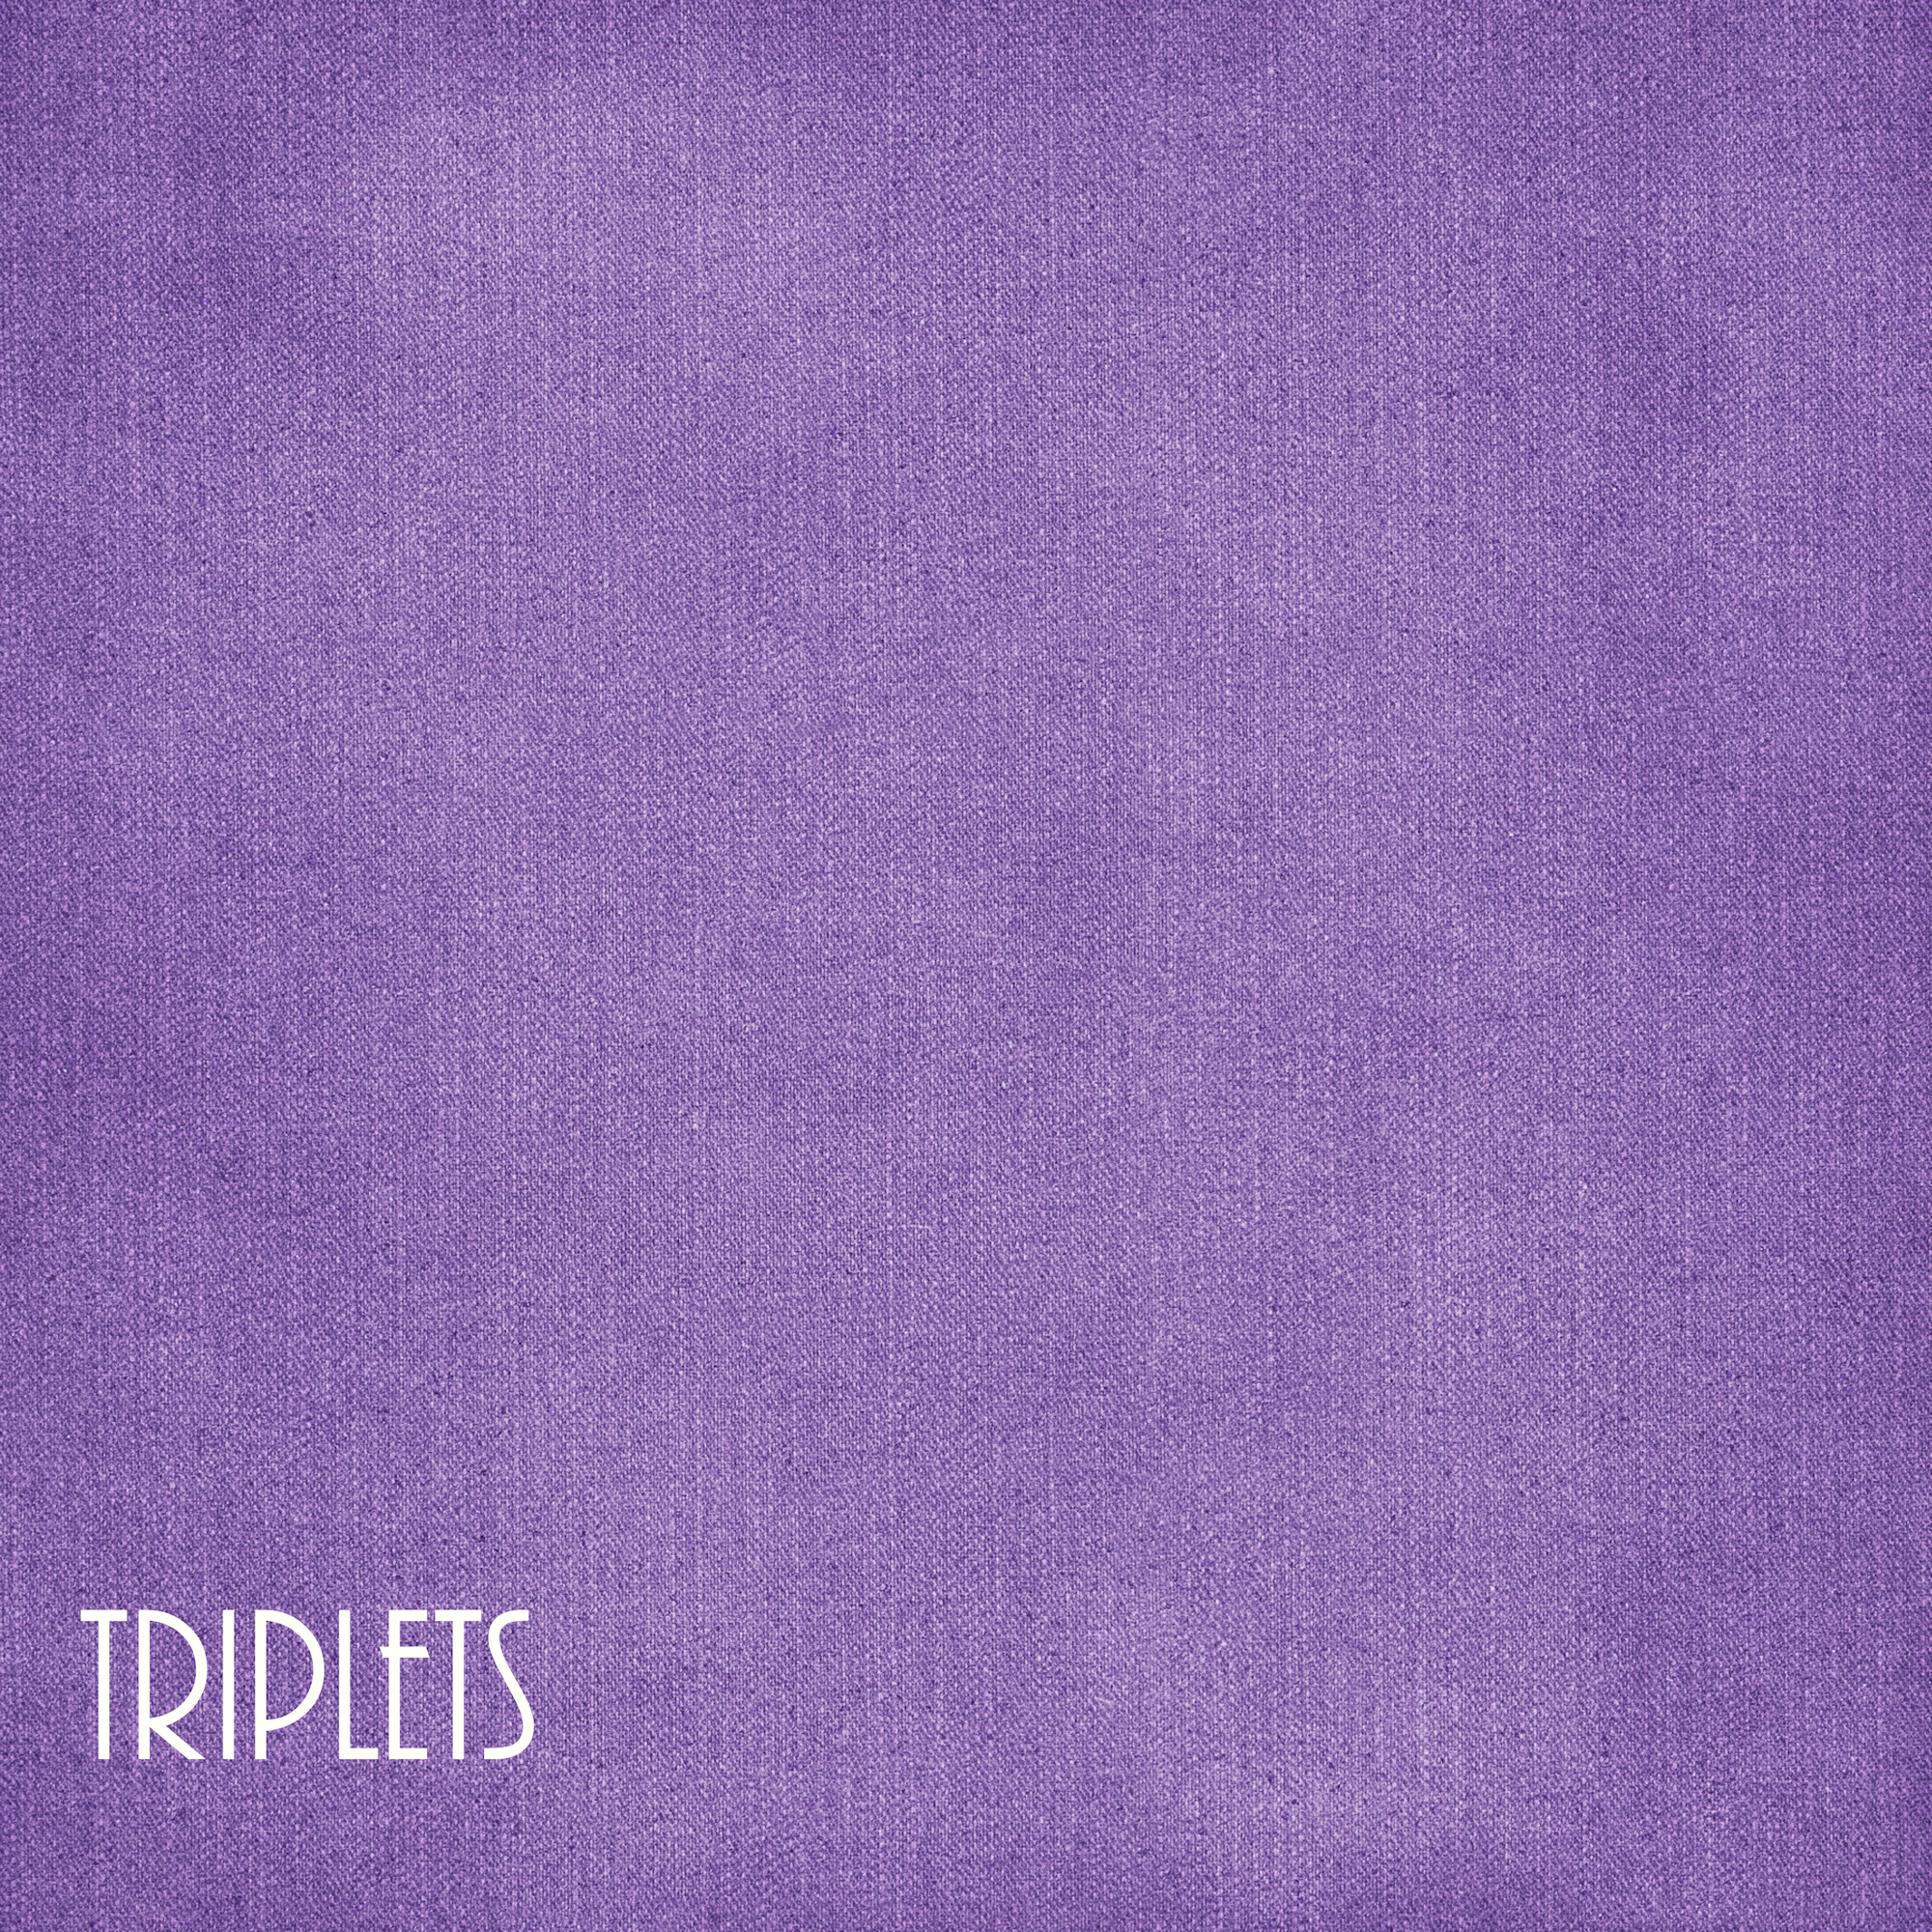 Family Collection Triplets 12 x 12 Double-Sided Scrapbook Paper by SSC Designs